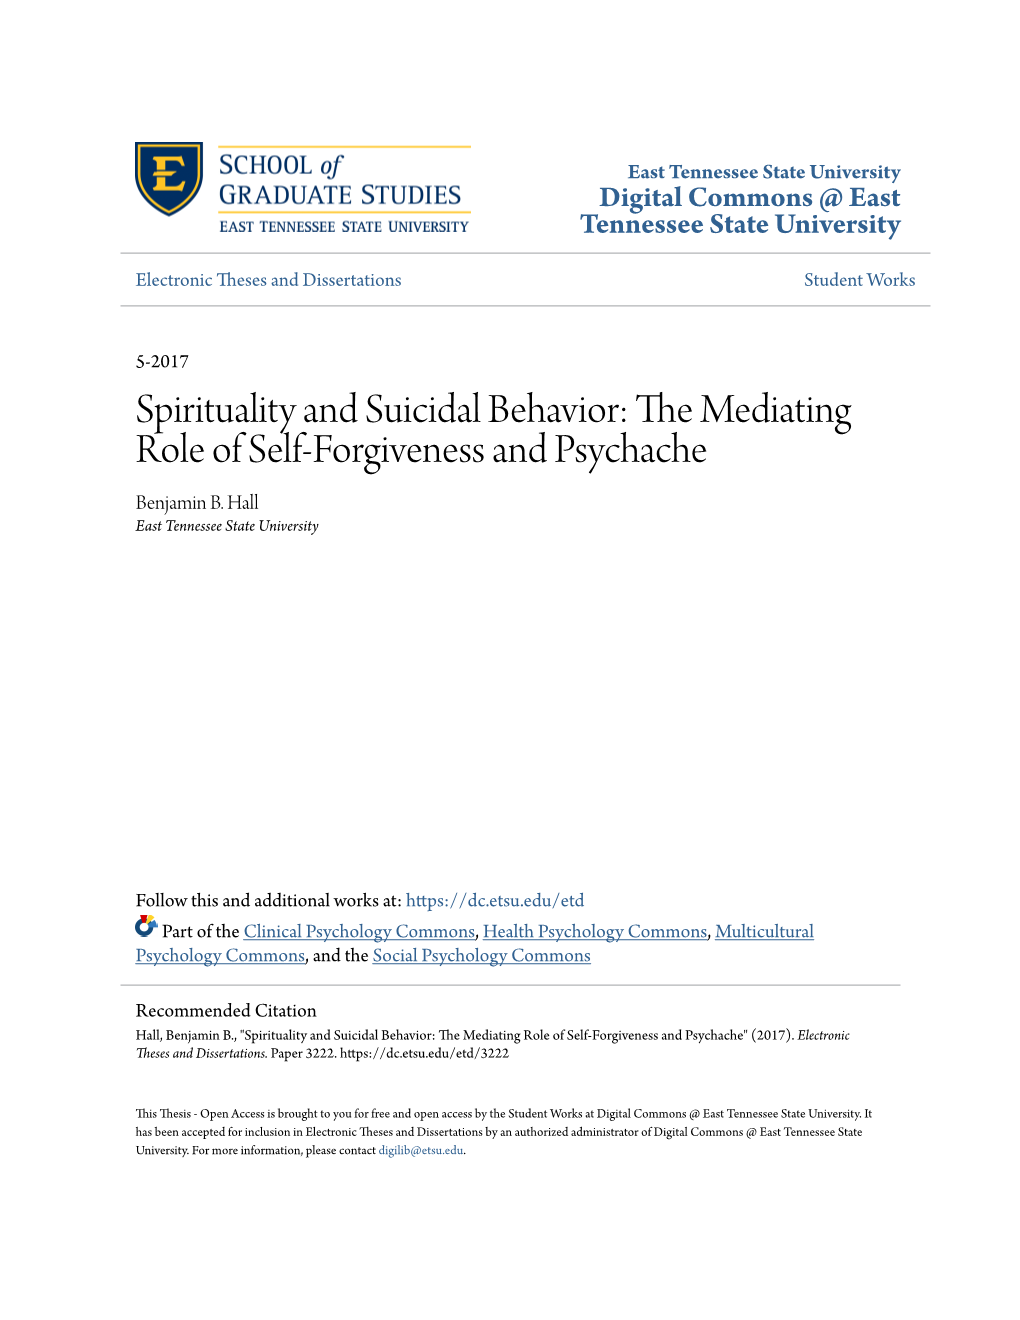 Spirituality and Suicidal Behavior: the Mediating Role of Self-Forgiveness and Psychache